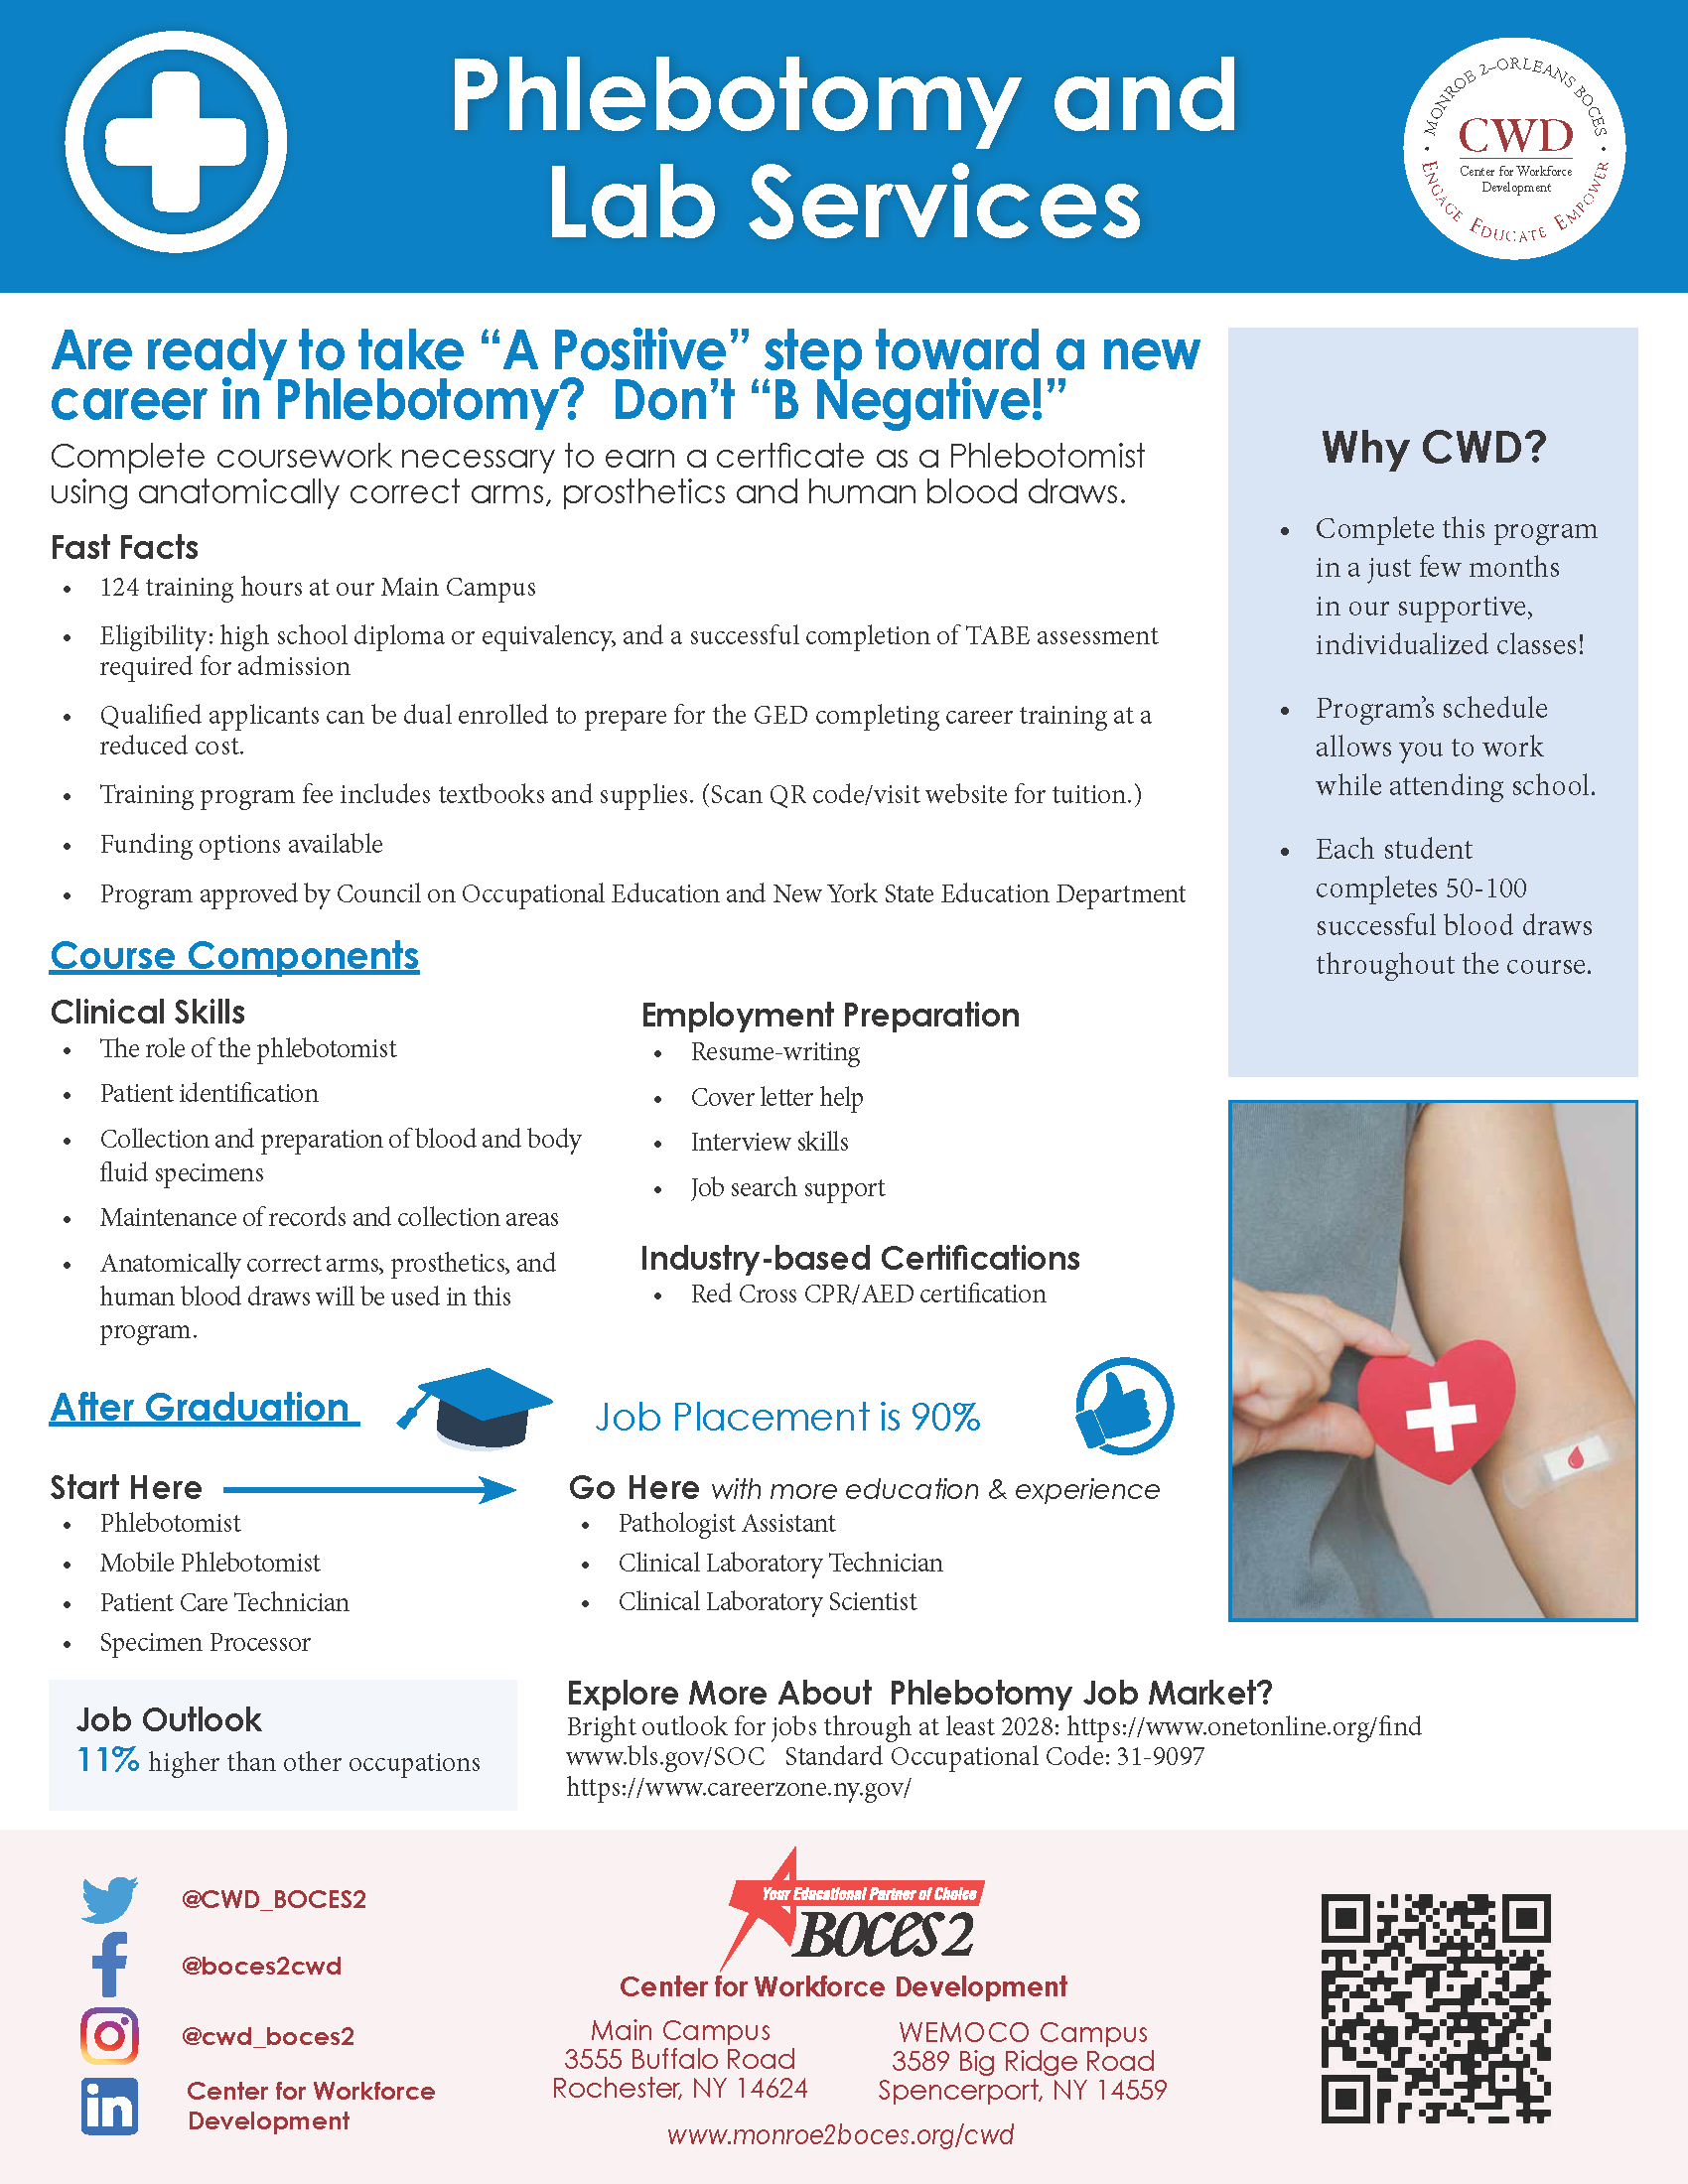 image of Phlebotomy and Lab Services flyer